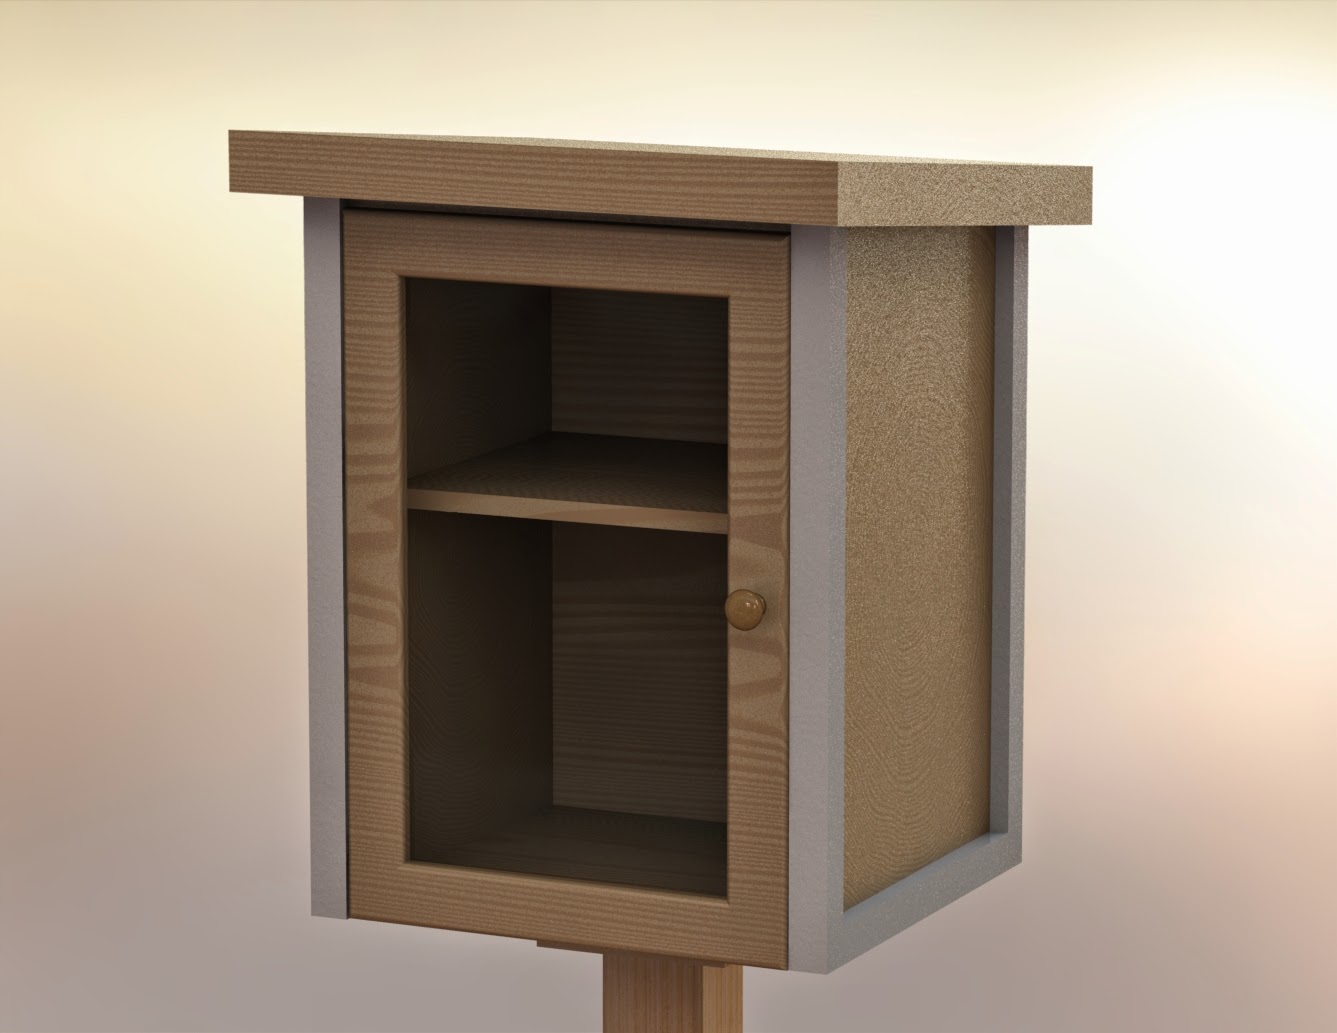 Fix It Adam: Little free library plans for "Amish Shed"